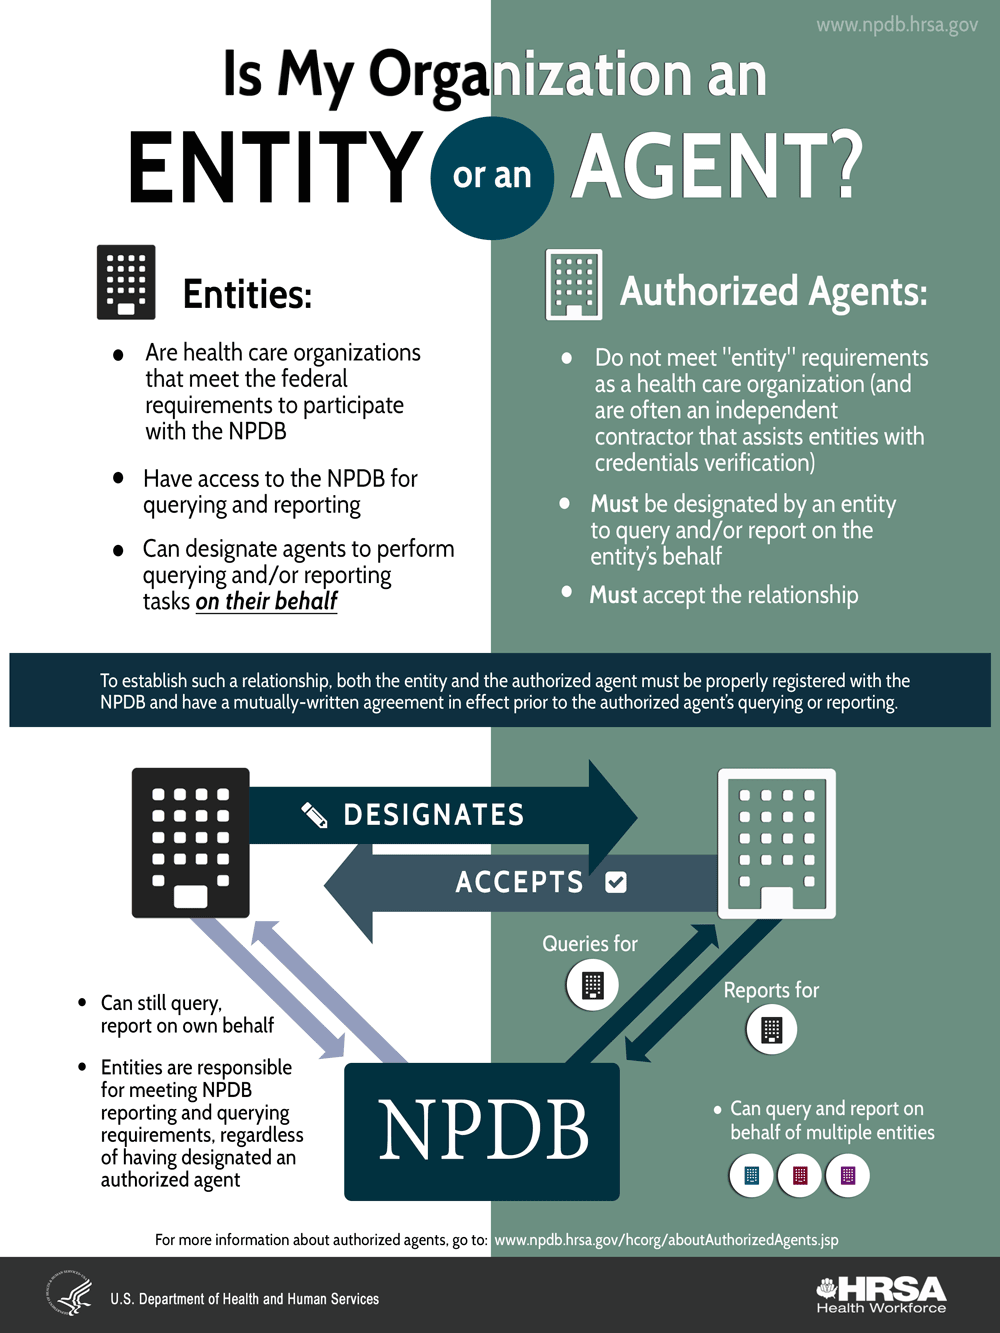 This is a printable version of the Is My Organization an Entity or Agent Infographic. It is the same version displayed on above.